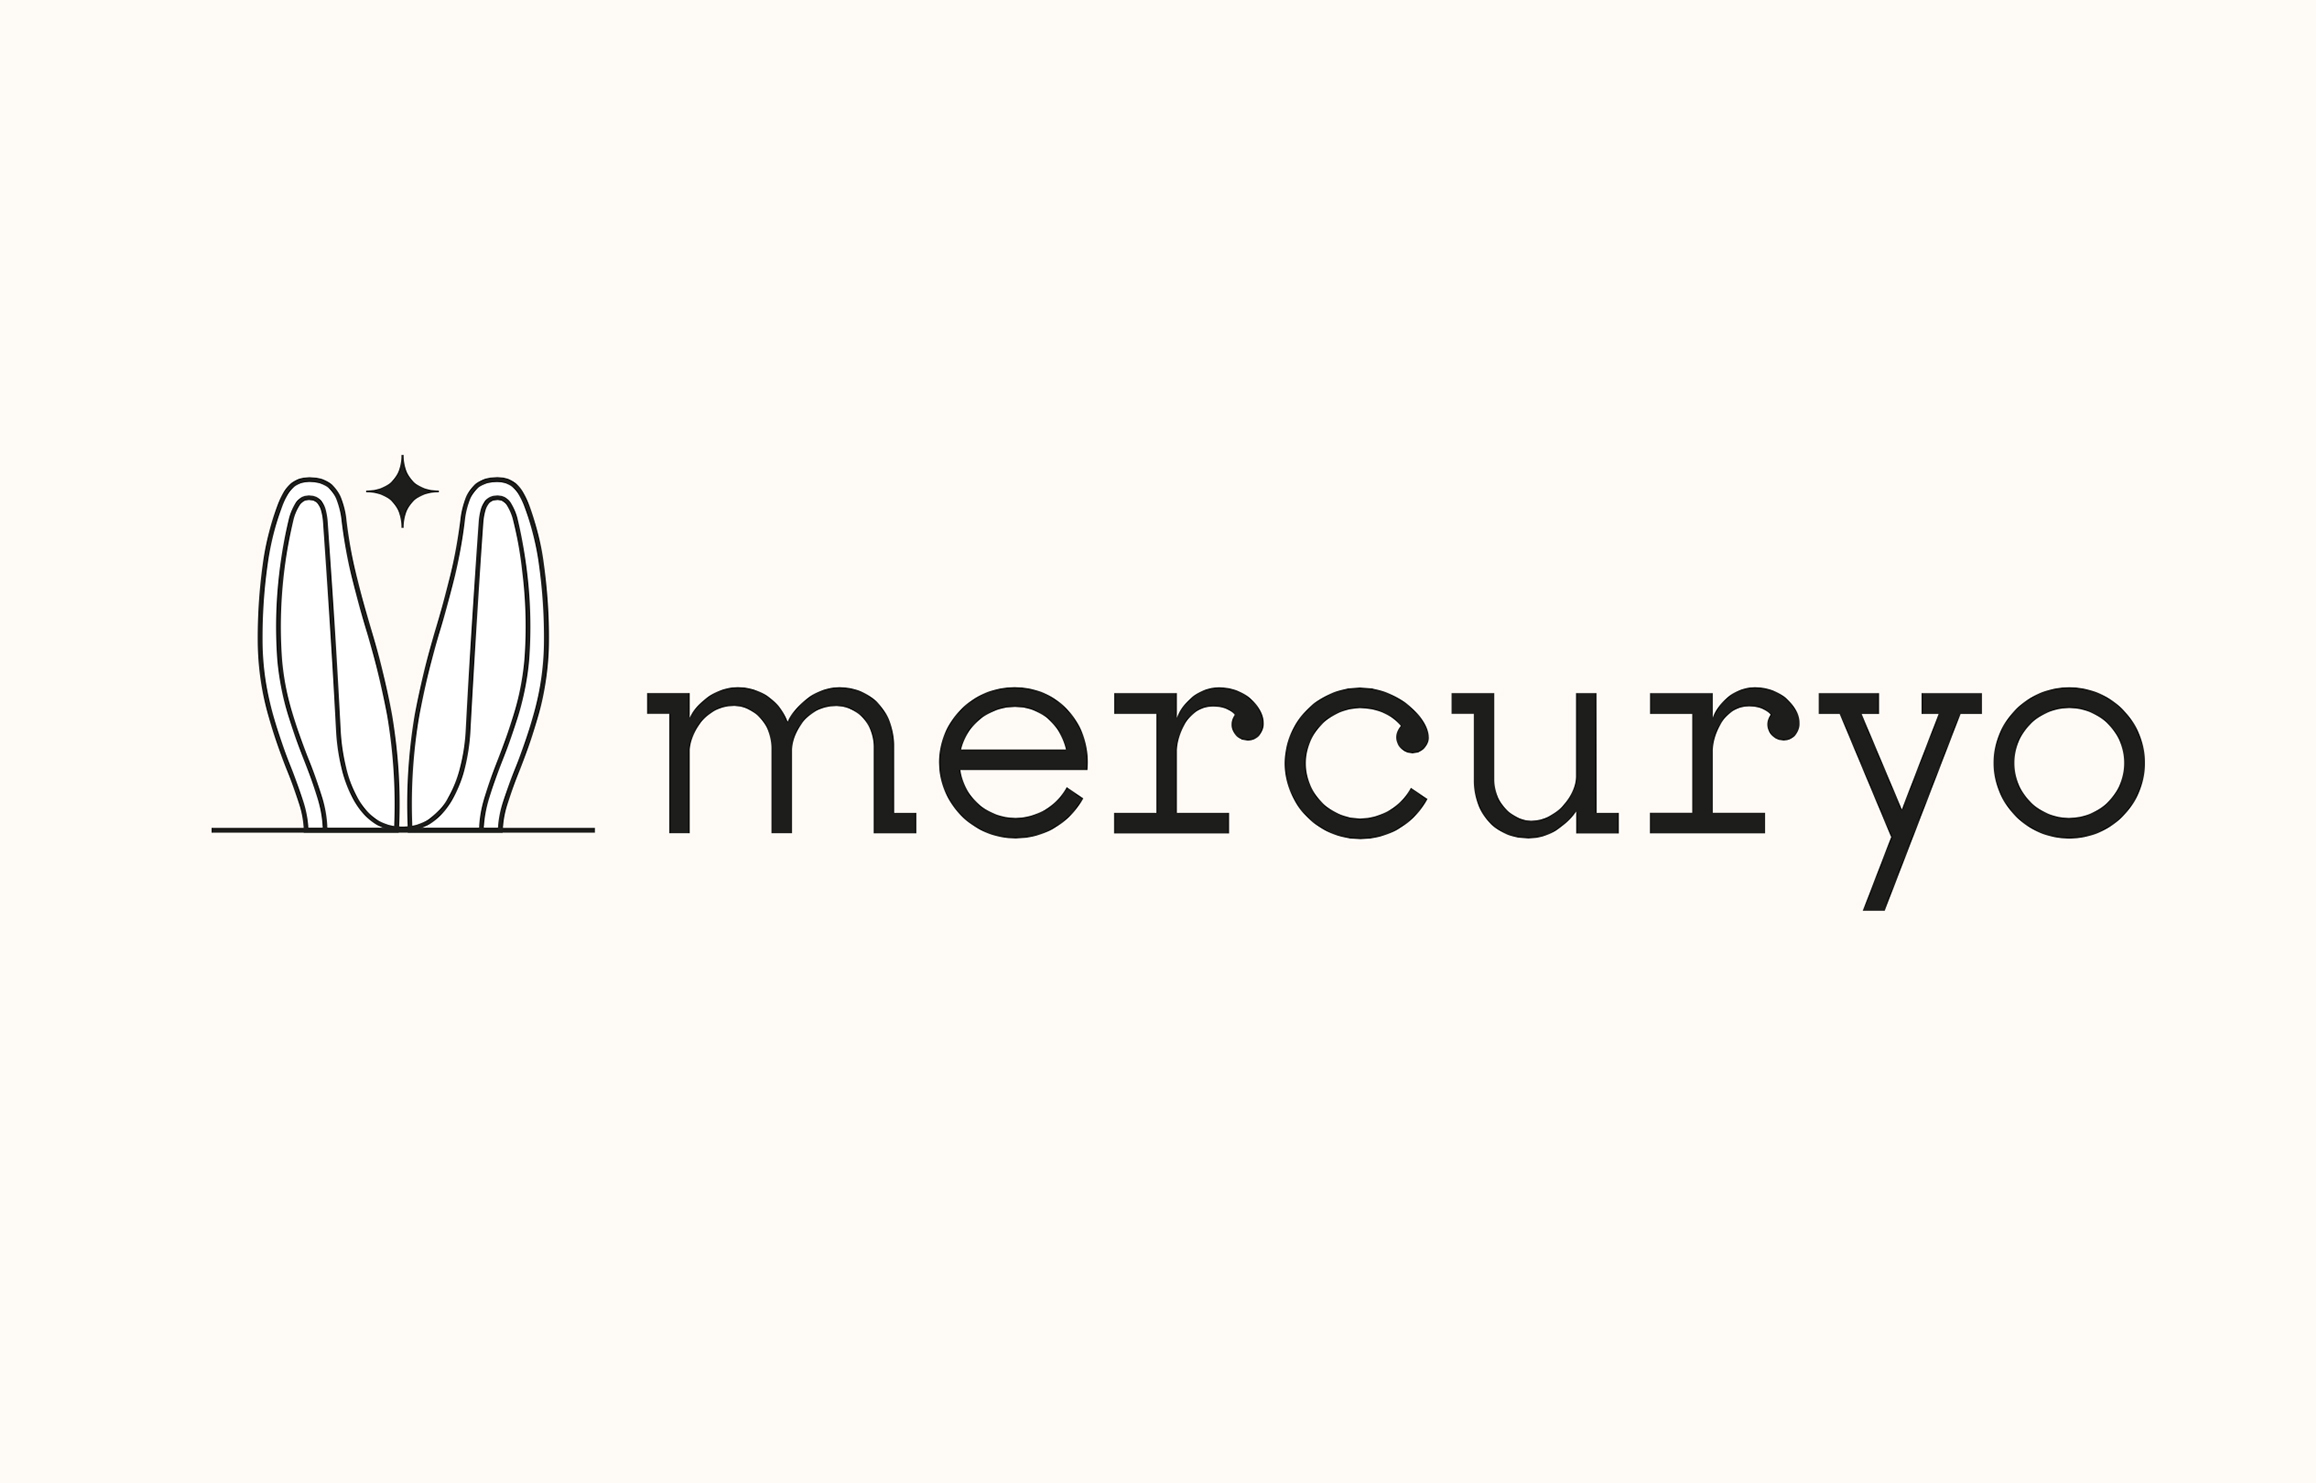 Mercuryo, PayMyTuition use open banking to streamline A2A payments ...